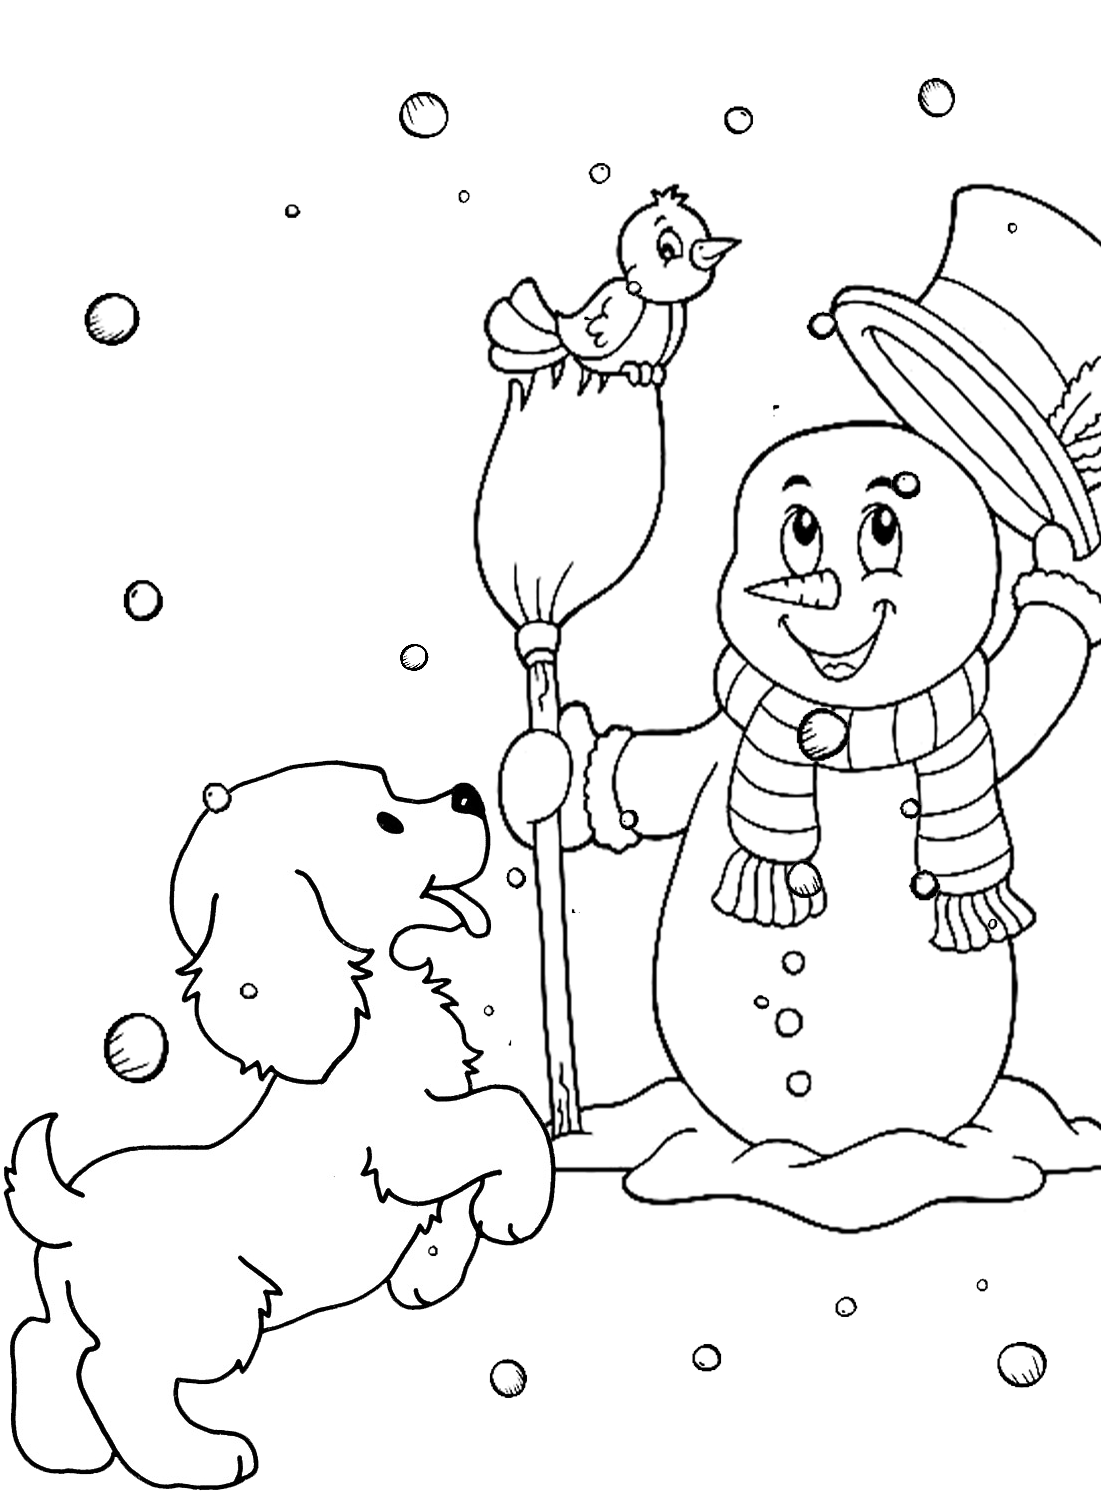 Snowman and Puppy Color Page